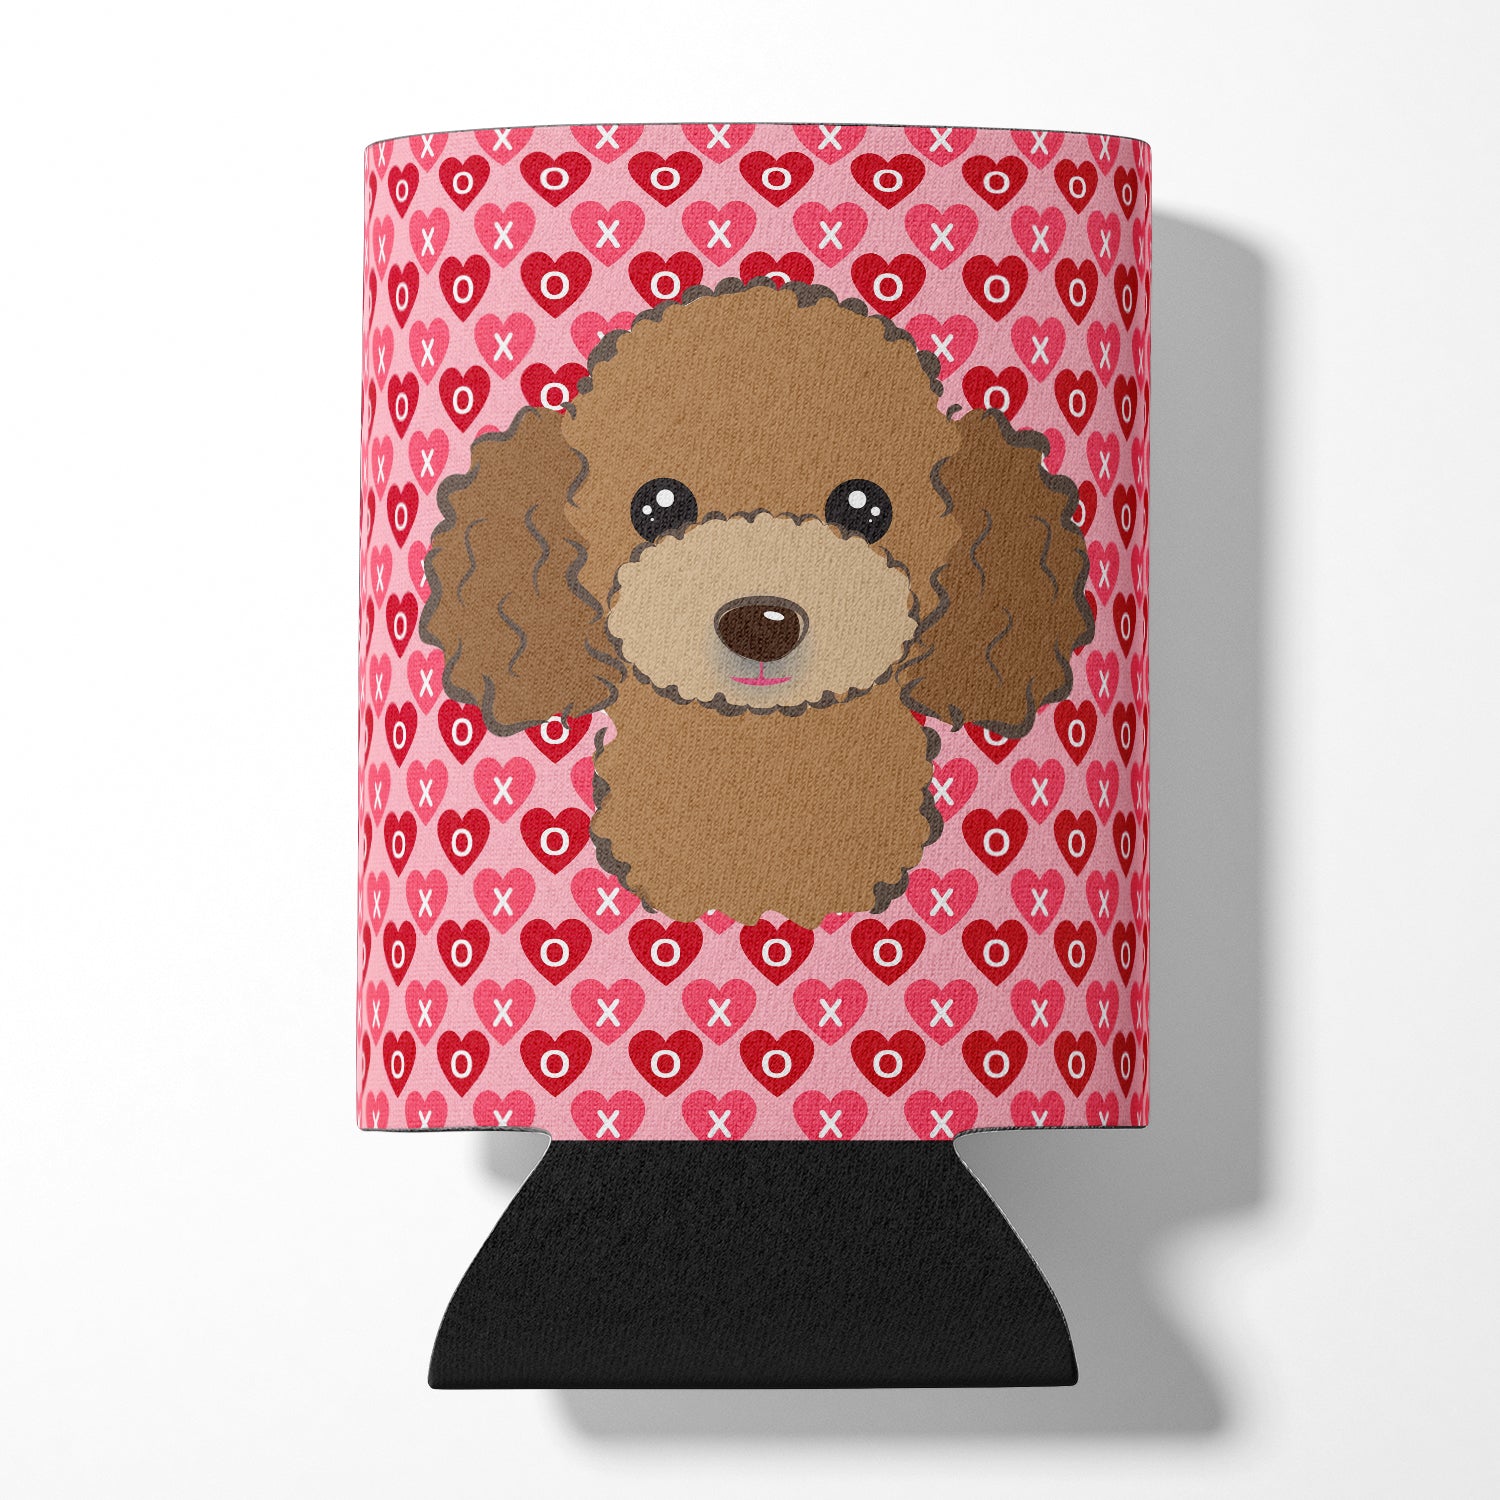 Chocolate Brown Poodle Hearts Can or Bottle Hugger BB5326CC